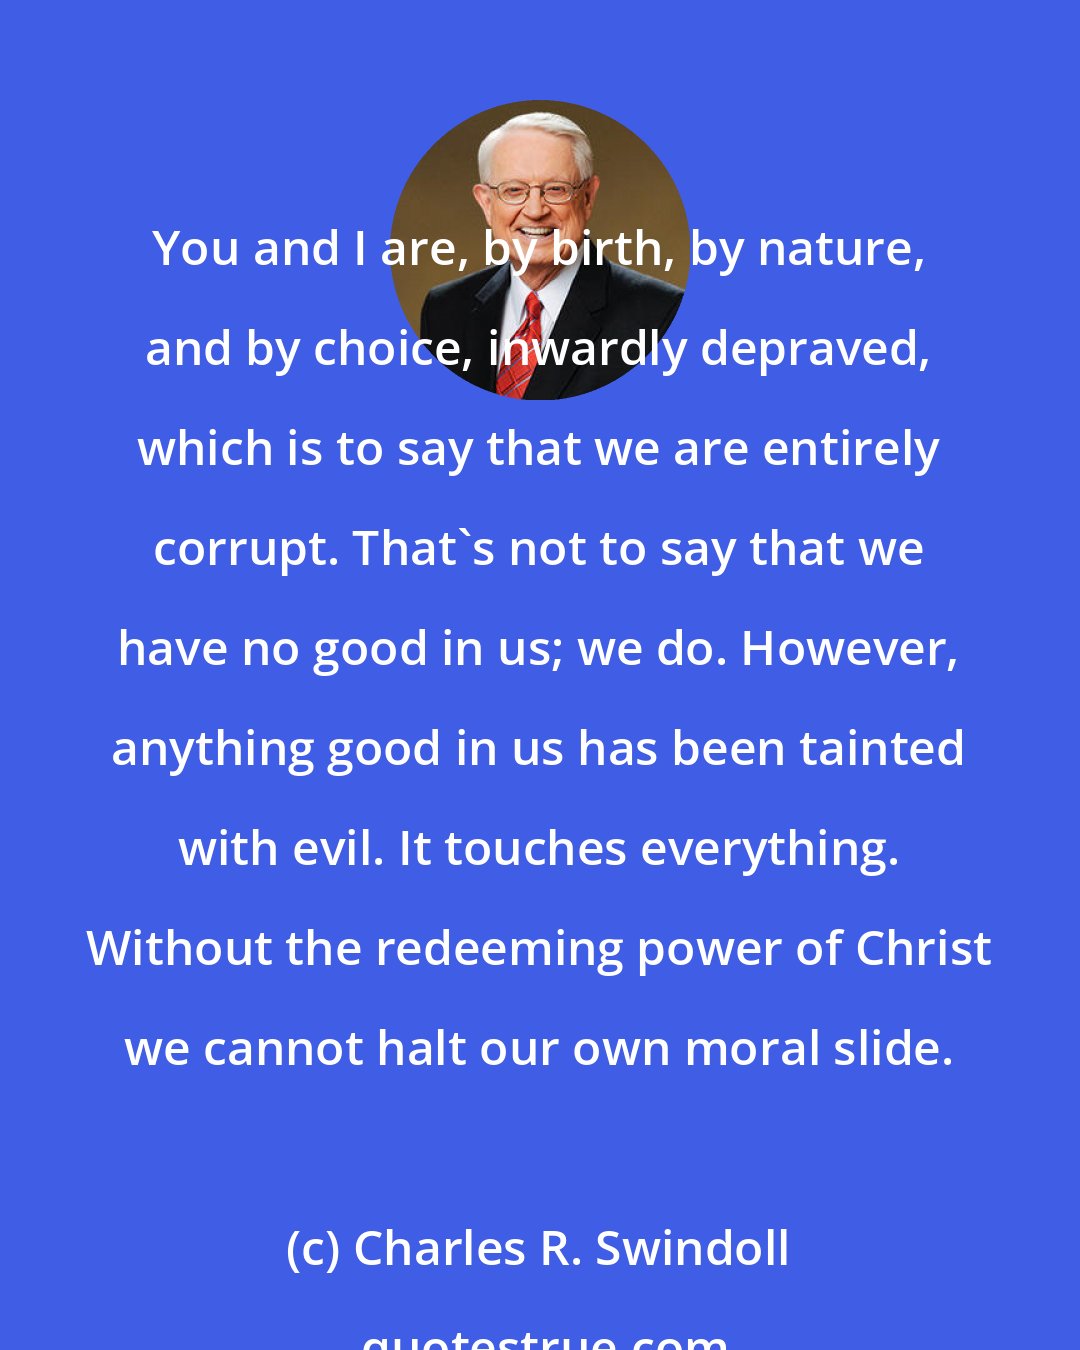 Charles R. Swindoll: You and I are, by birth, by nature, and by choice, inwardly depraved, which is to say that we are entirely corrupt. That's not to say that we have no good in us; we do. However, anything good in us has been tainted with evil. It touches everything. Without the redeeming power of Christ we cannot halt our own moral slide.